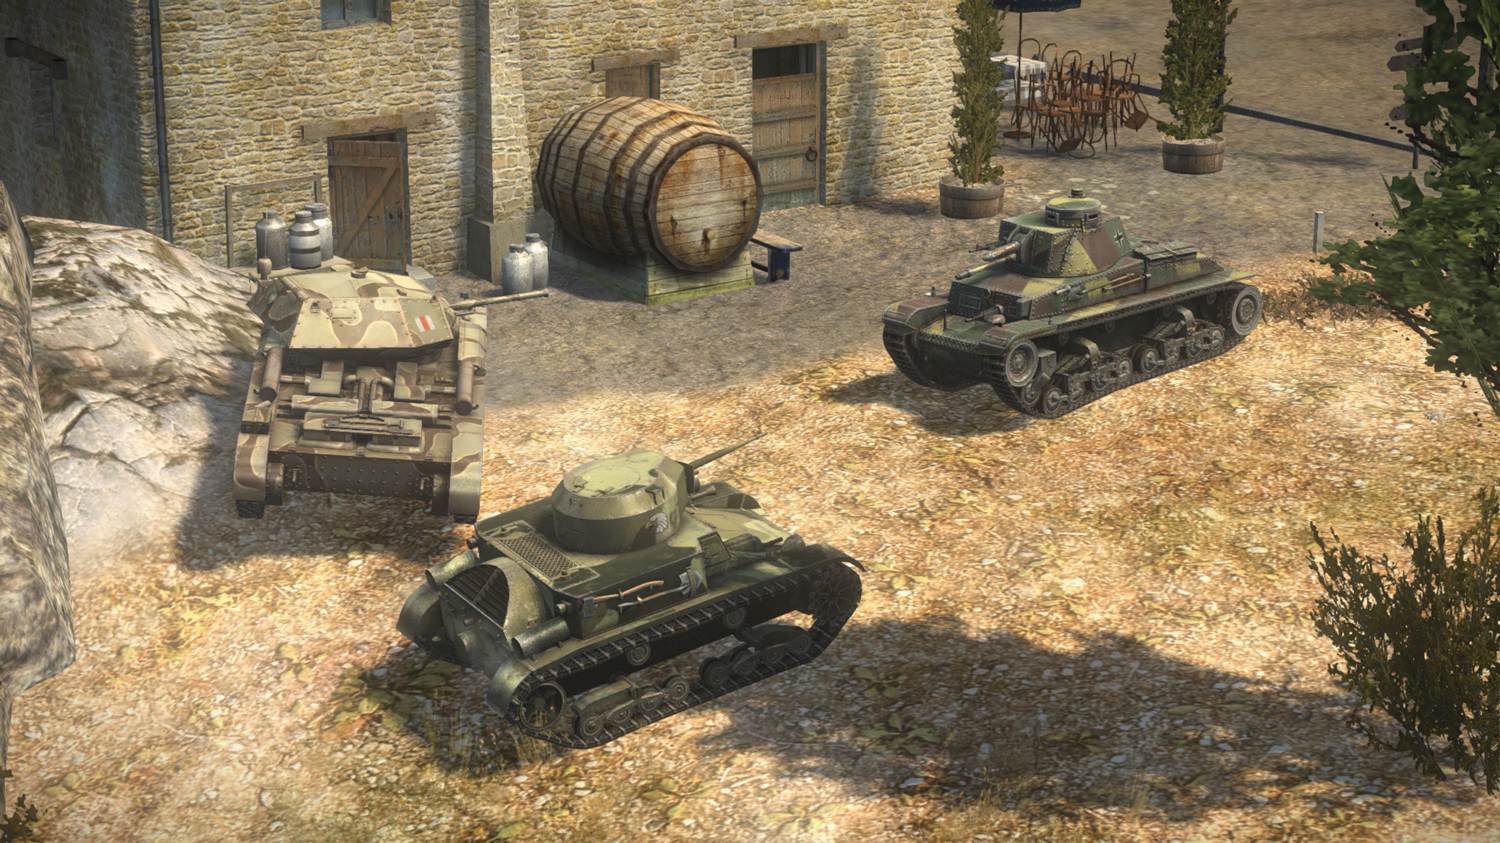 world-of-tanks-xbox-360-edition-now-available-globally-xbox-wire